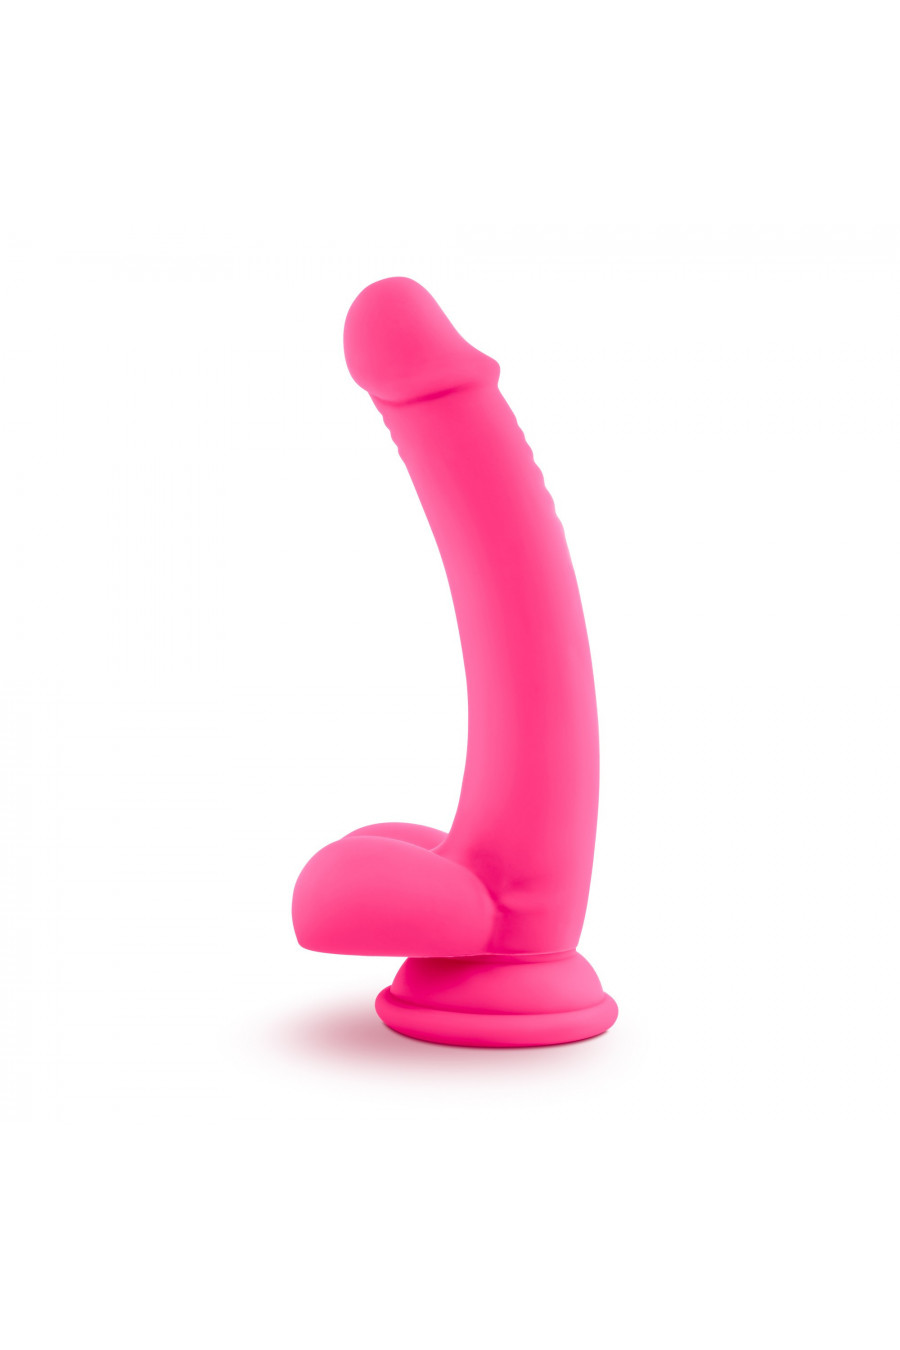 Realistycznie Dildo Punktu G I P Blush Ruse D Thang / sold out